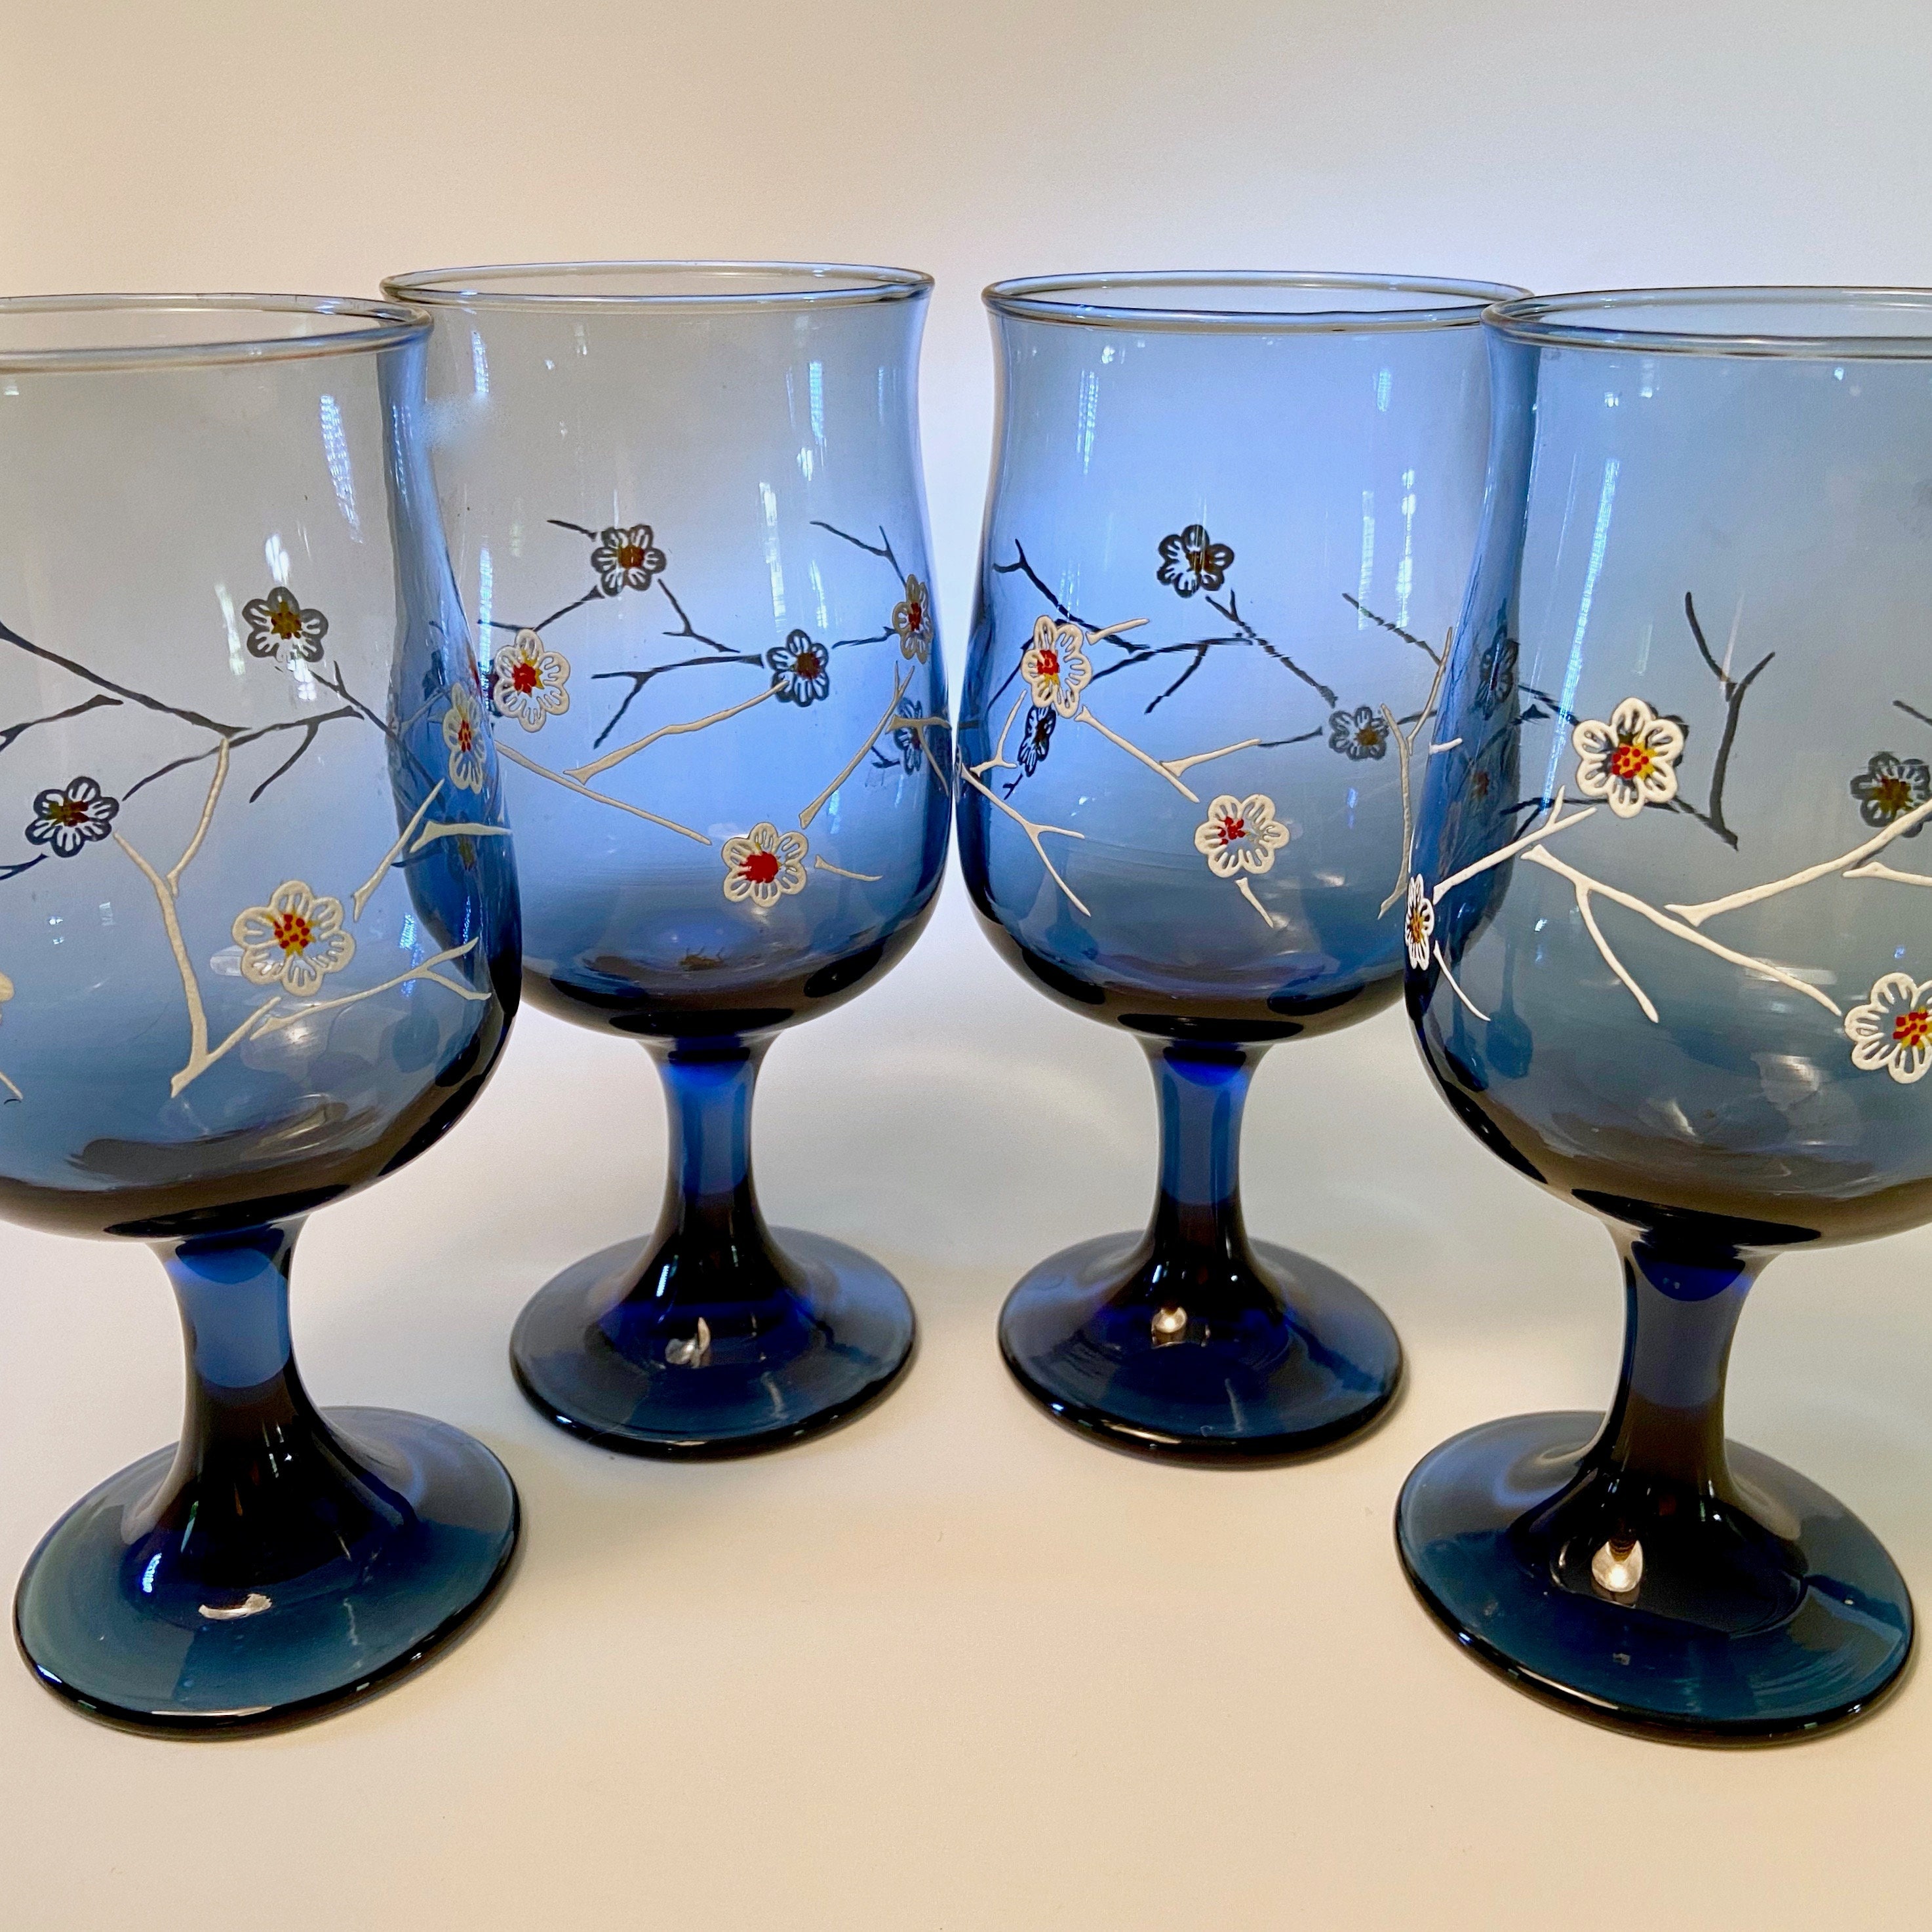 Vintage Wildlife Beer Glasses Set of 4 with Four Different Scenes by Libbey